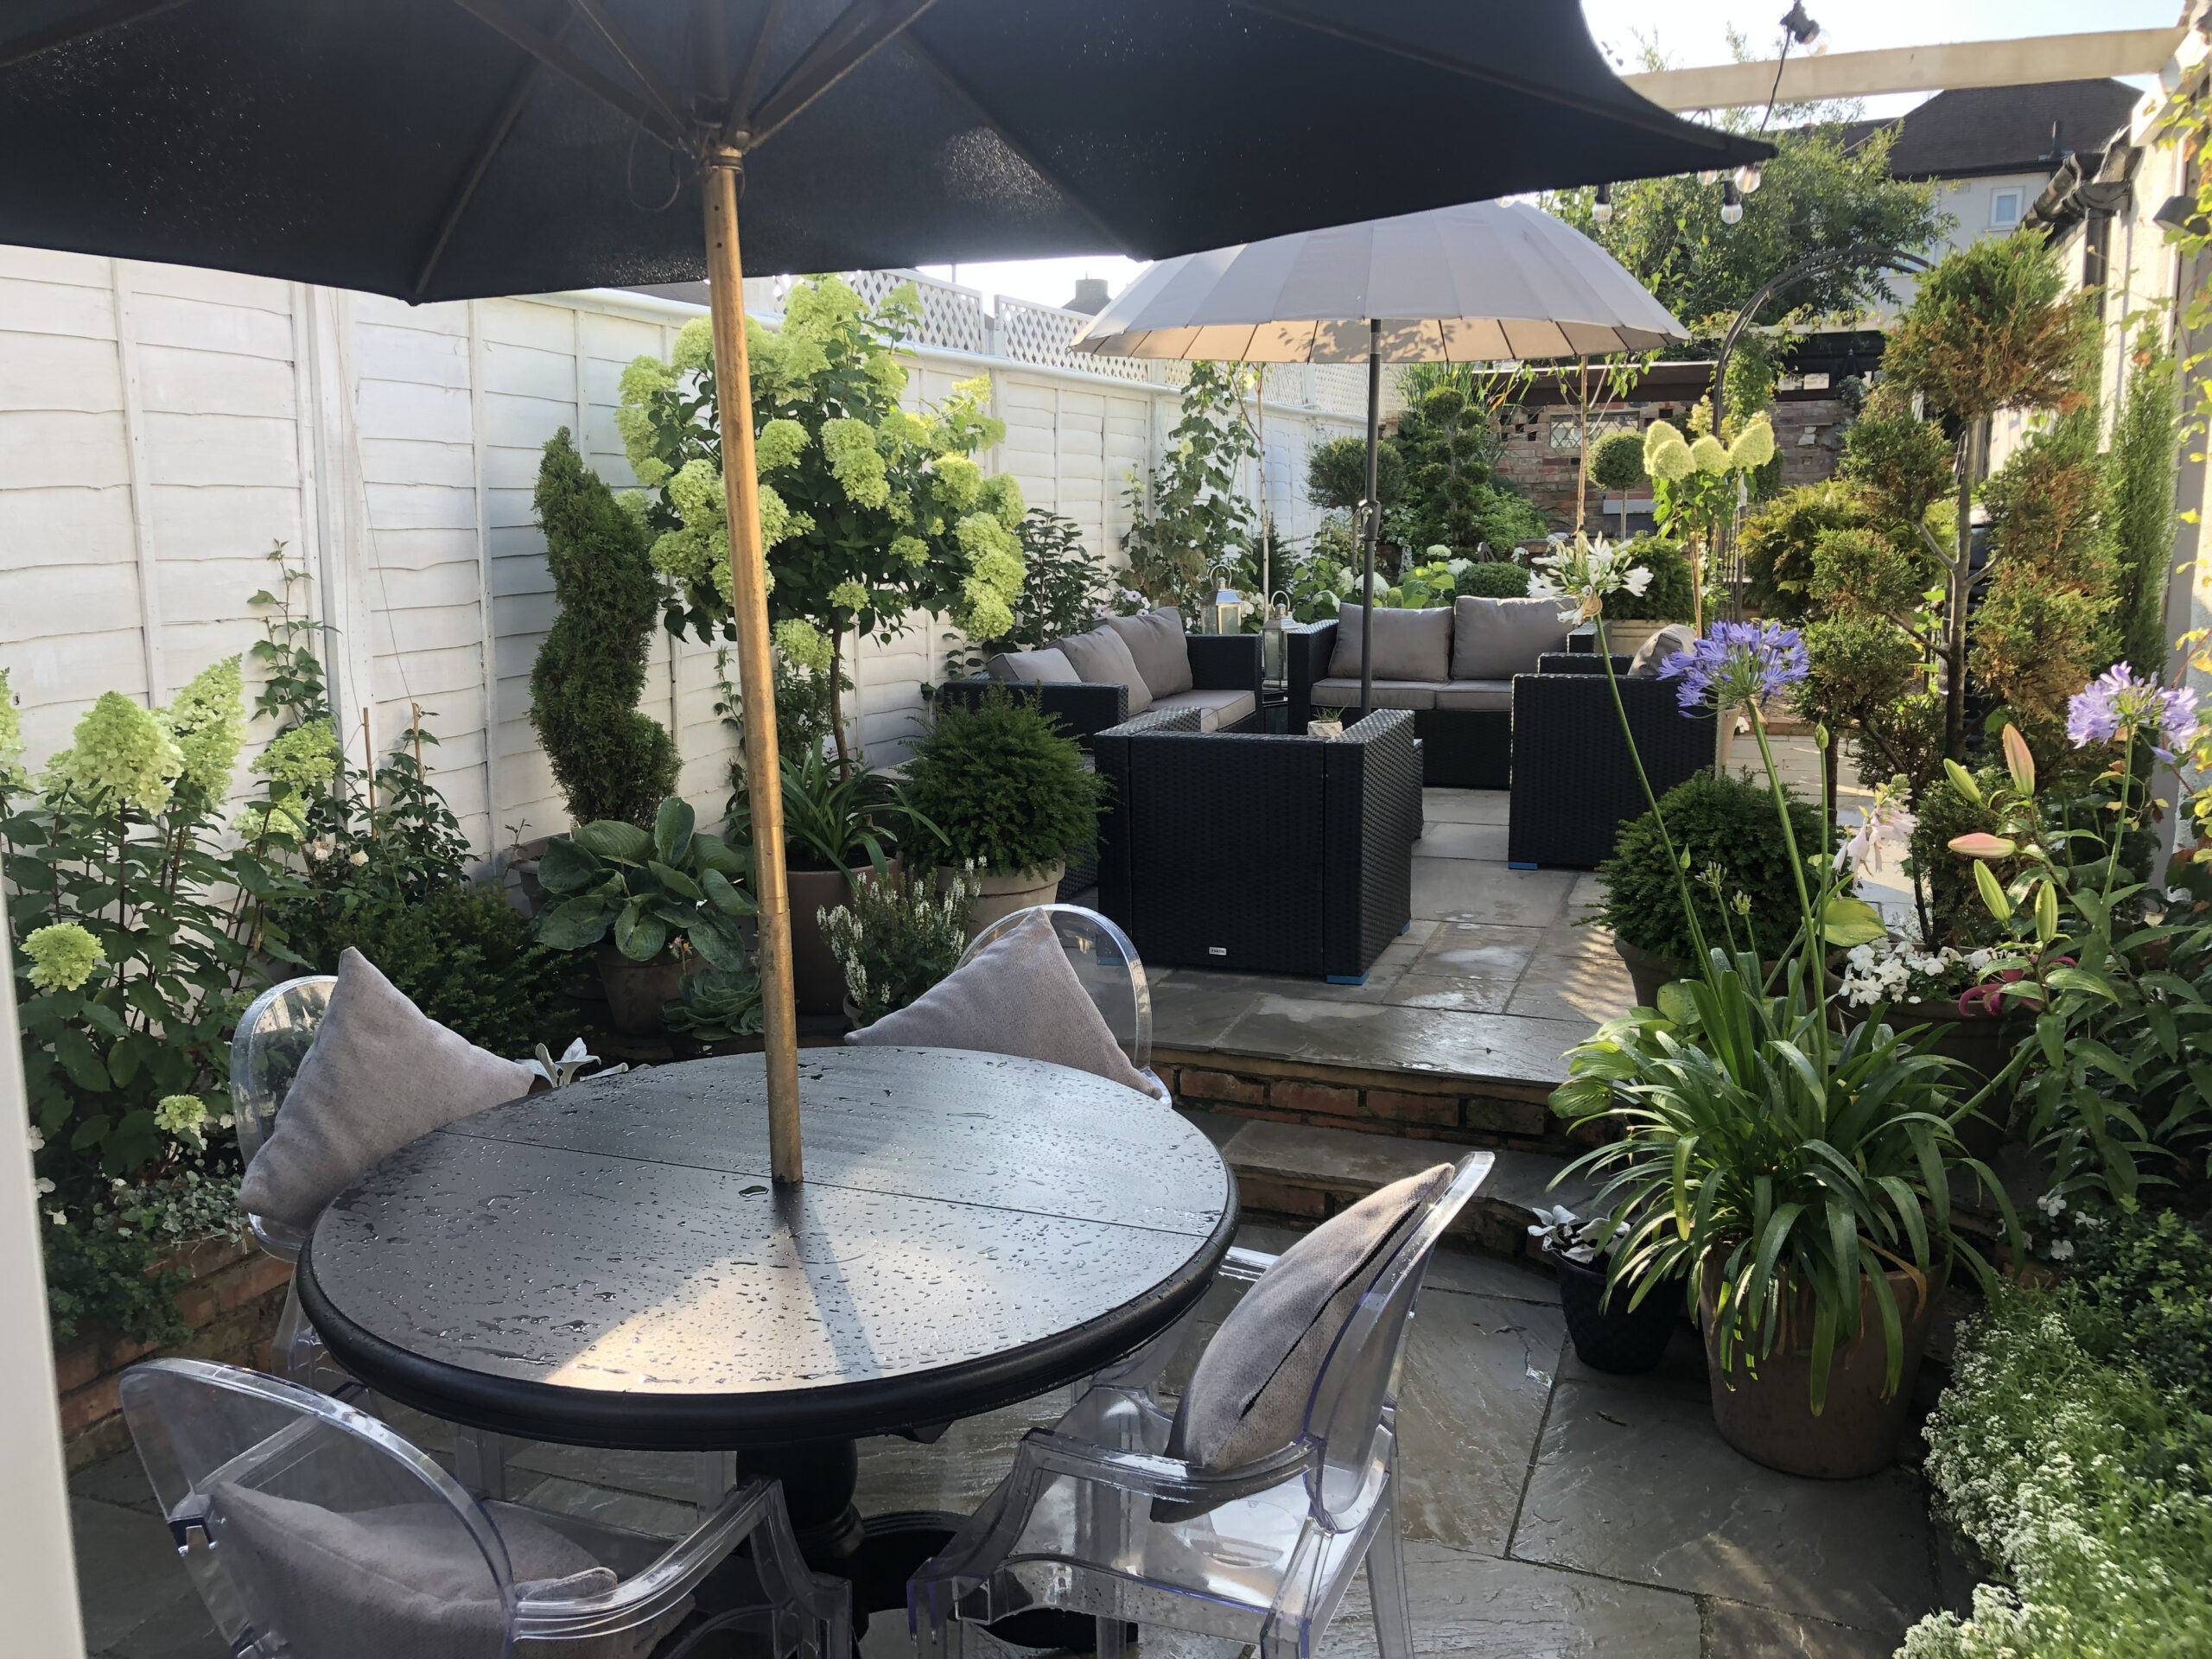 A multi-tiered tiled garden patio filled with potted plants surrounding a glass top garden table with an umbrella and a seven-seater rattan furniture set designed by Willow Alexander